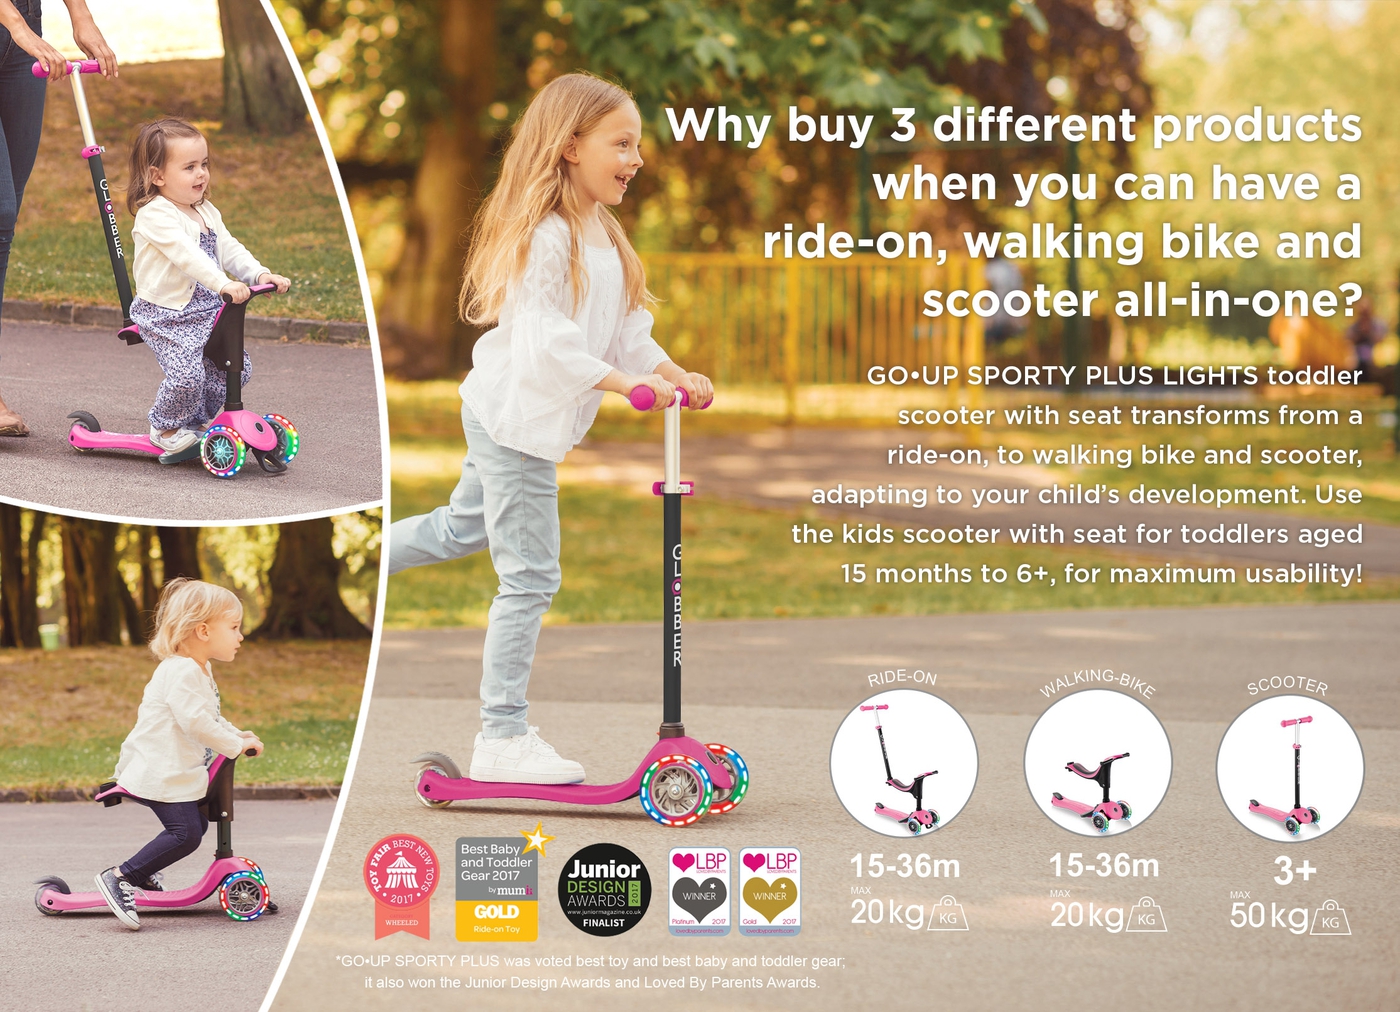 Why buy 3 different products when you can have a ride-on, walking bike and scooter all-in-one?